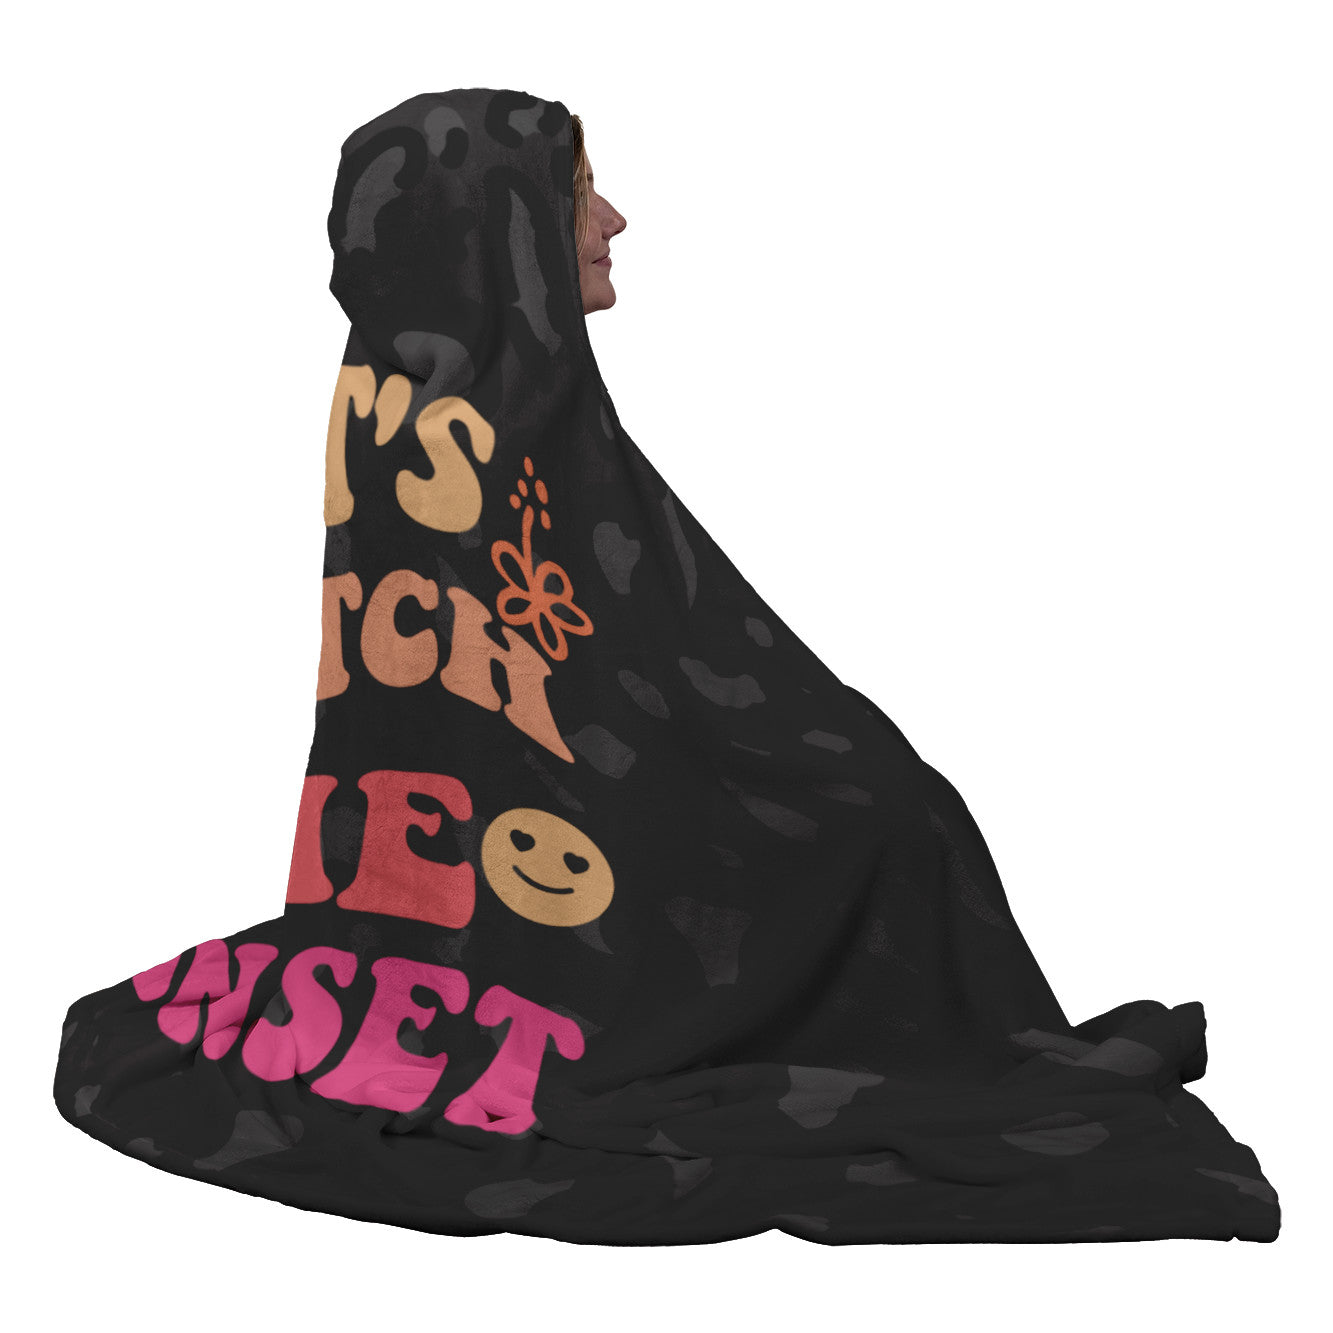 Let's Watch The Sunset Black Leopard Print Hooded Blanket